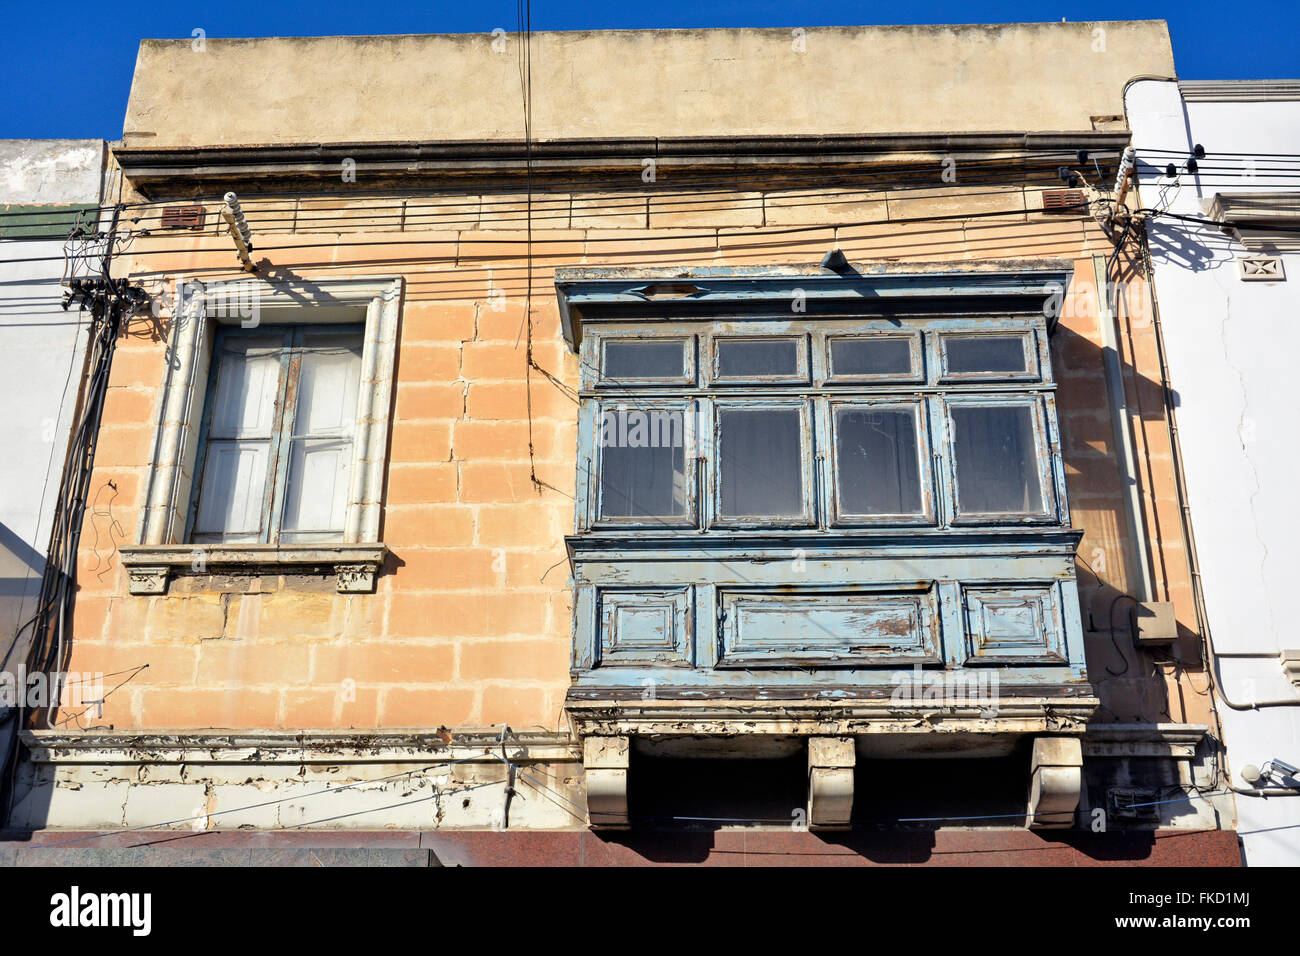 Window and balcony of a residential house in Mellieha, Malta on January 27, 2016. Stock Photo